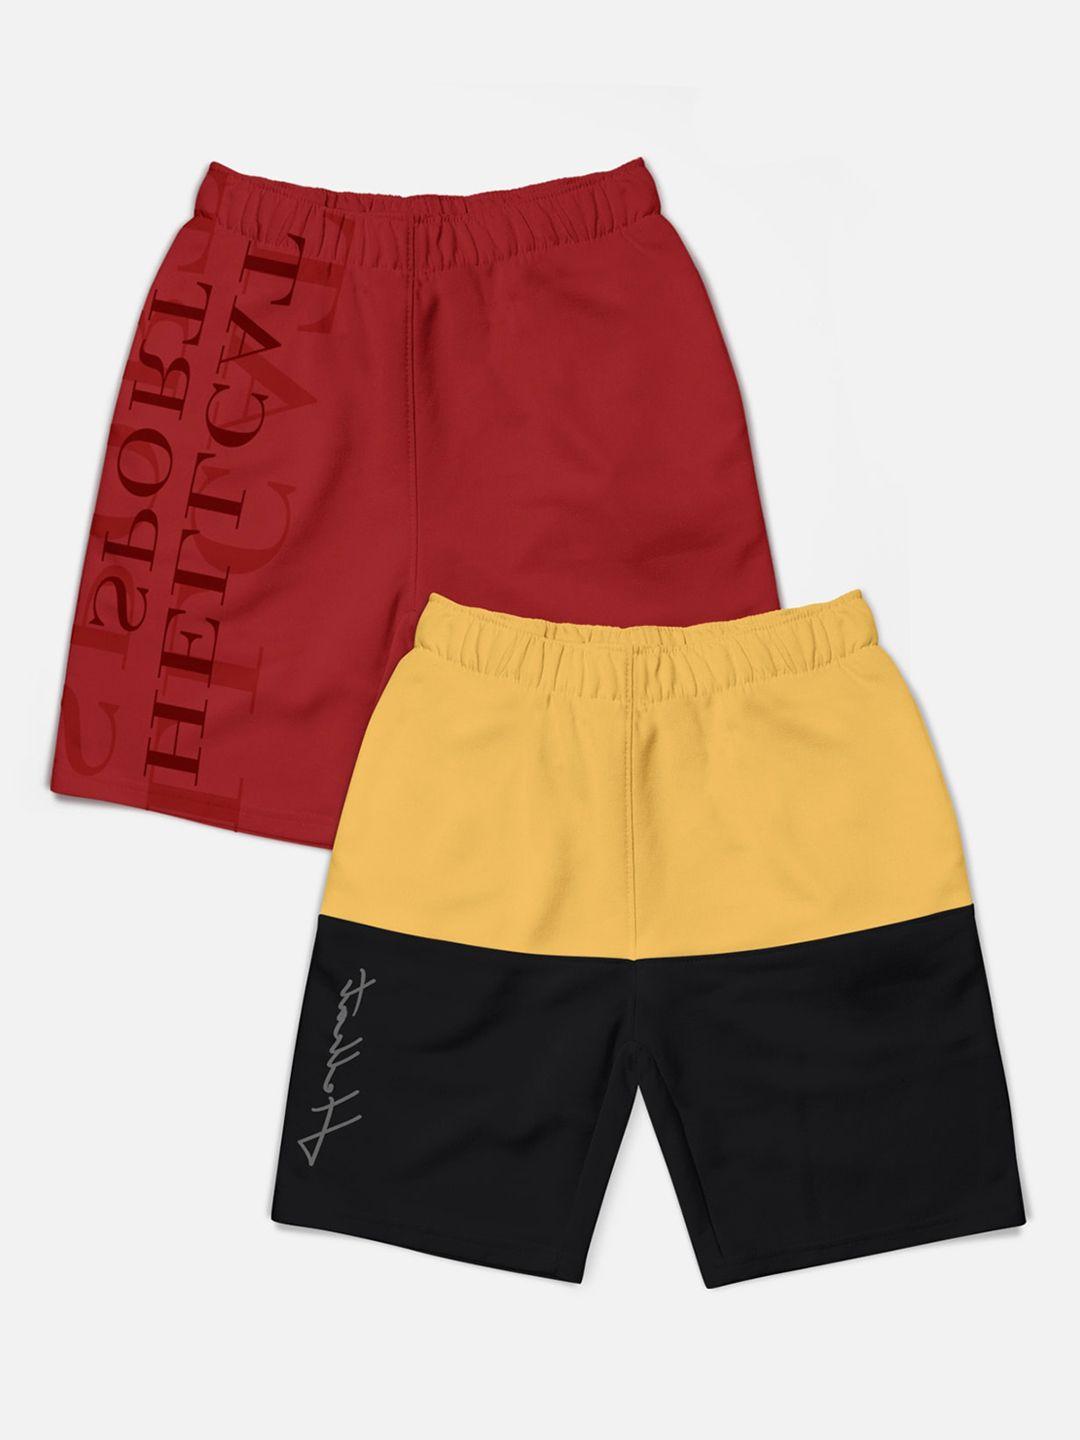 HELLCAT Boys Pack Of 2 Typography Printed Cotton Shorts